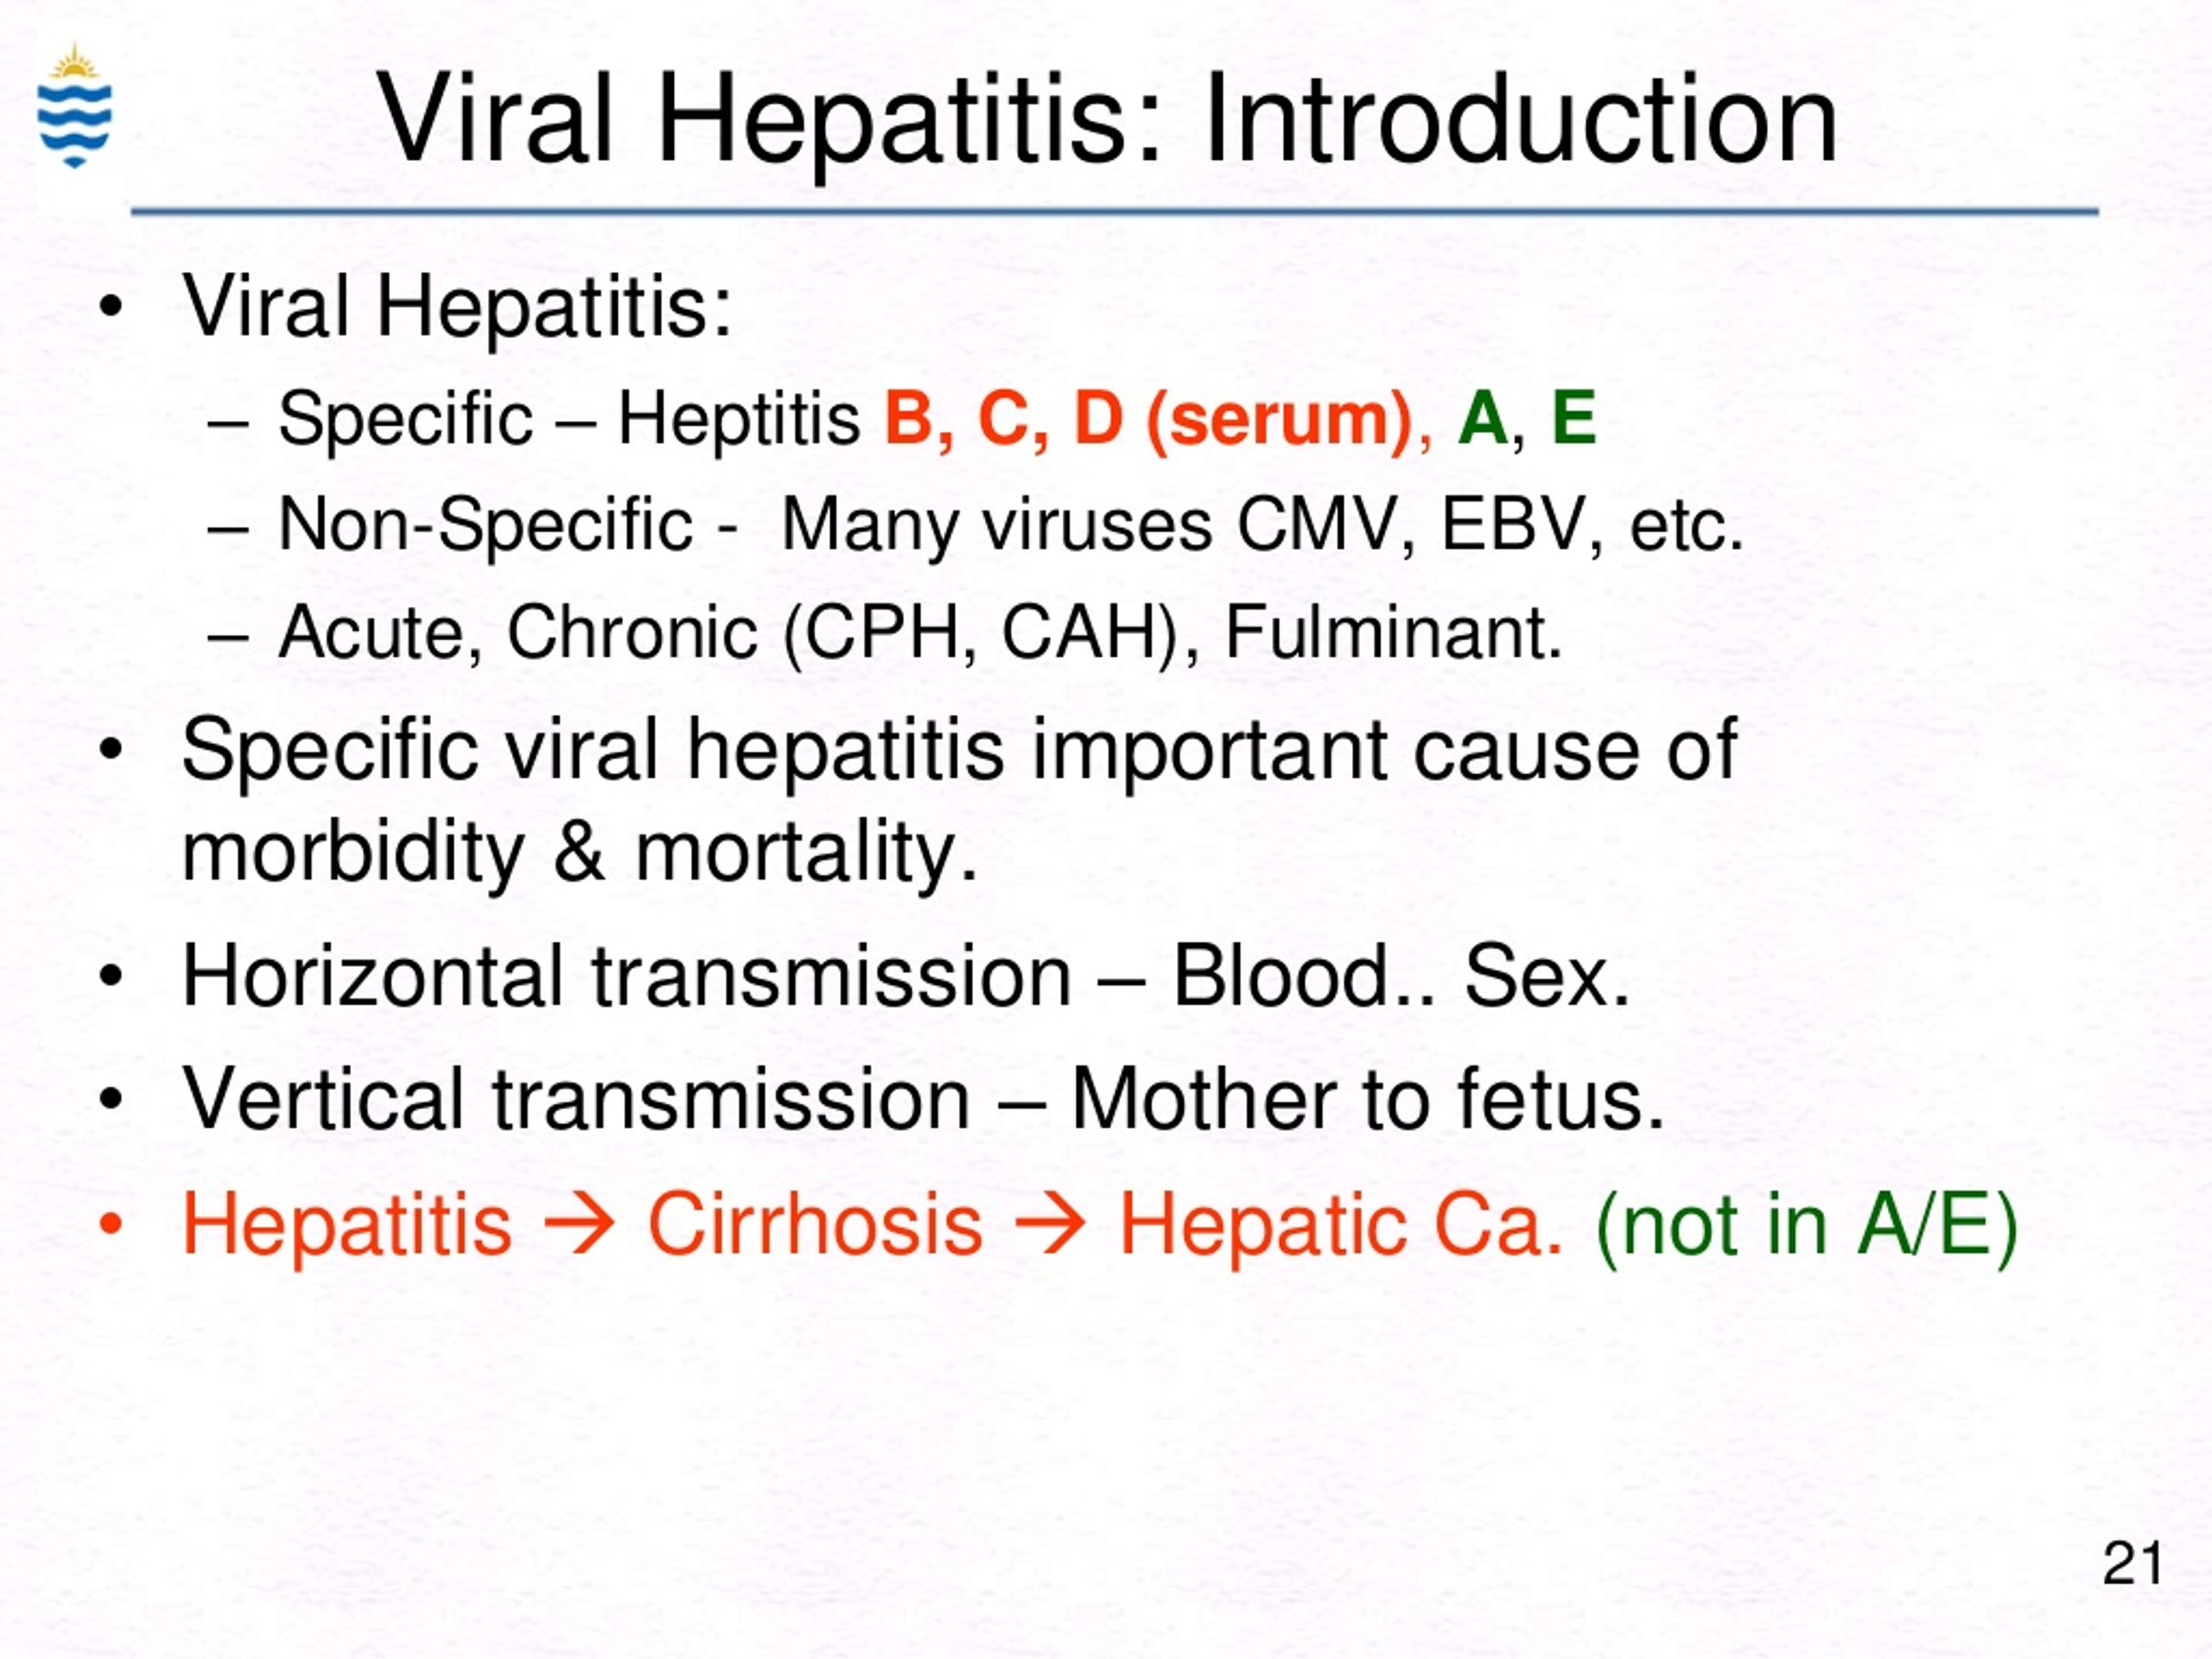 PPT Pathology Of Hepatitis Lecture PowerPoint Presentation Free Download ID